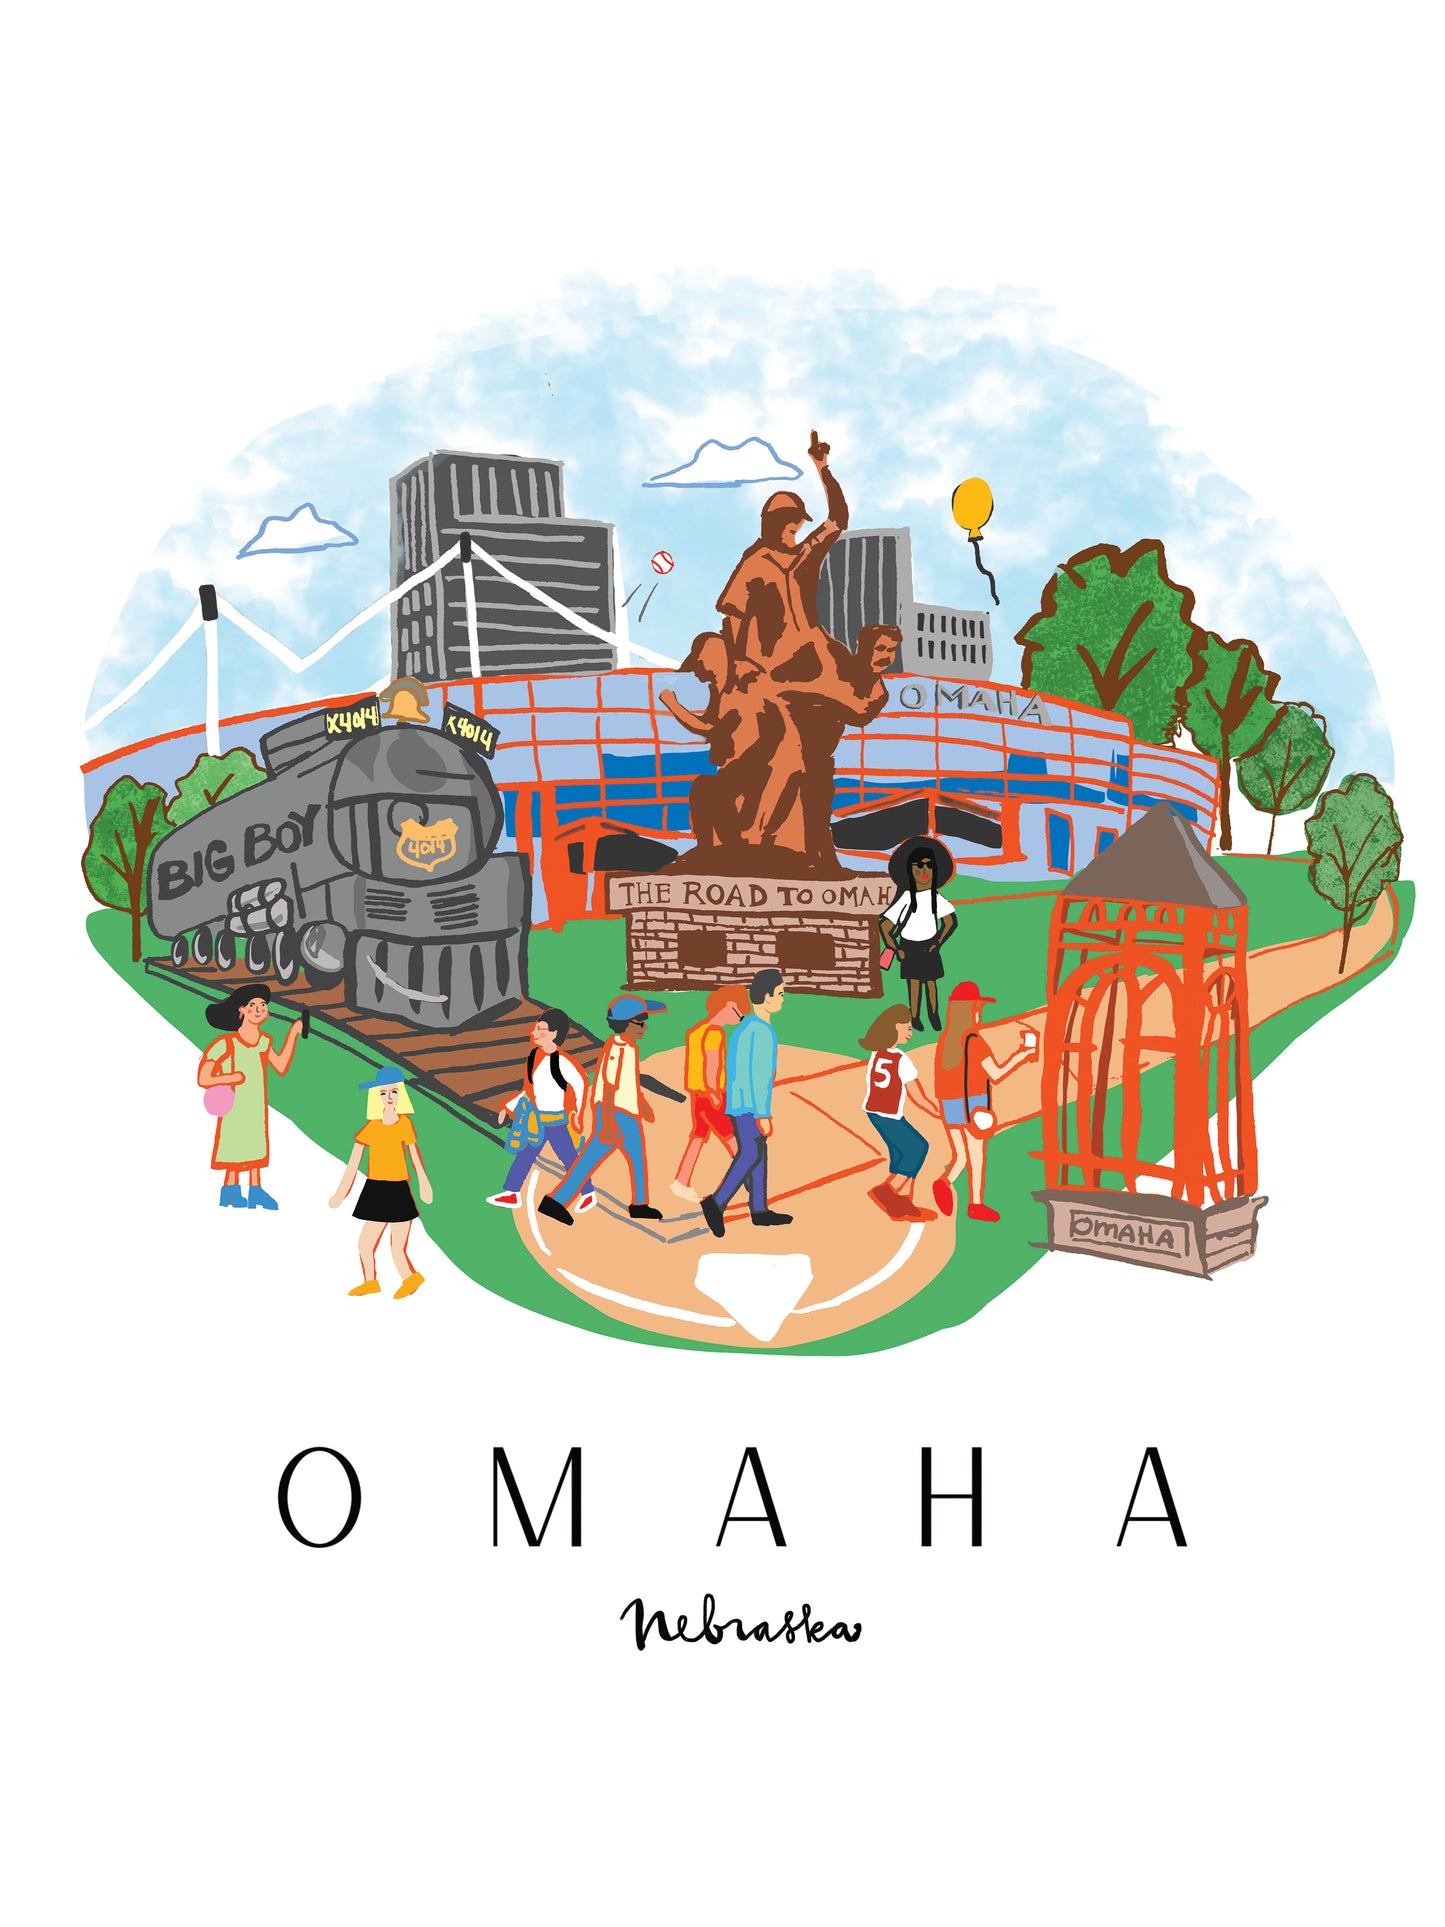 The Road to Omaha Print